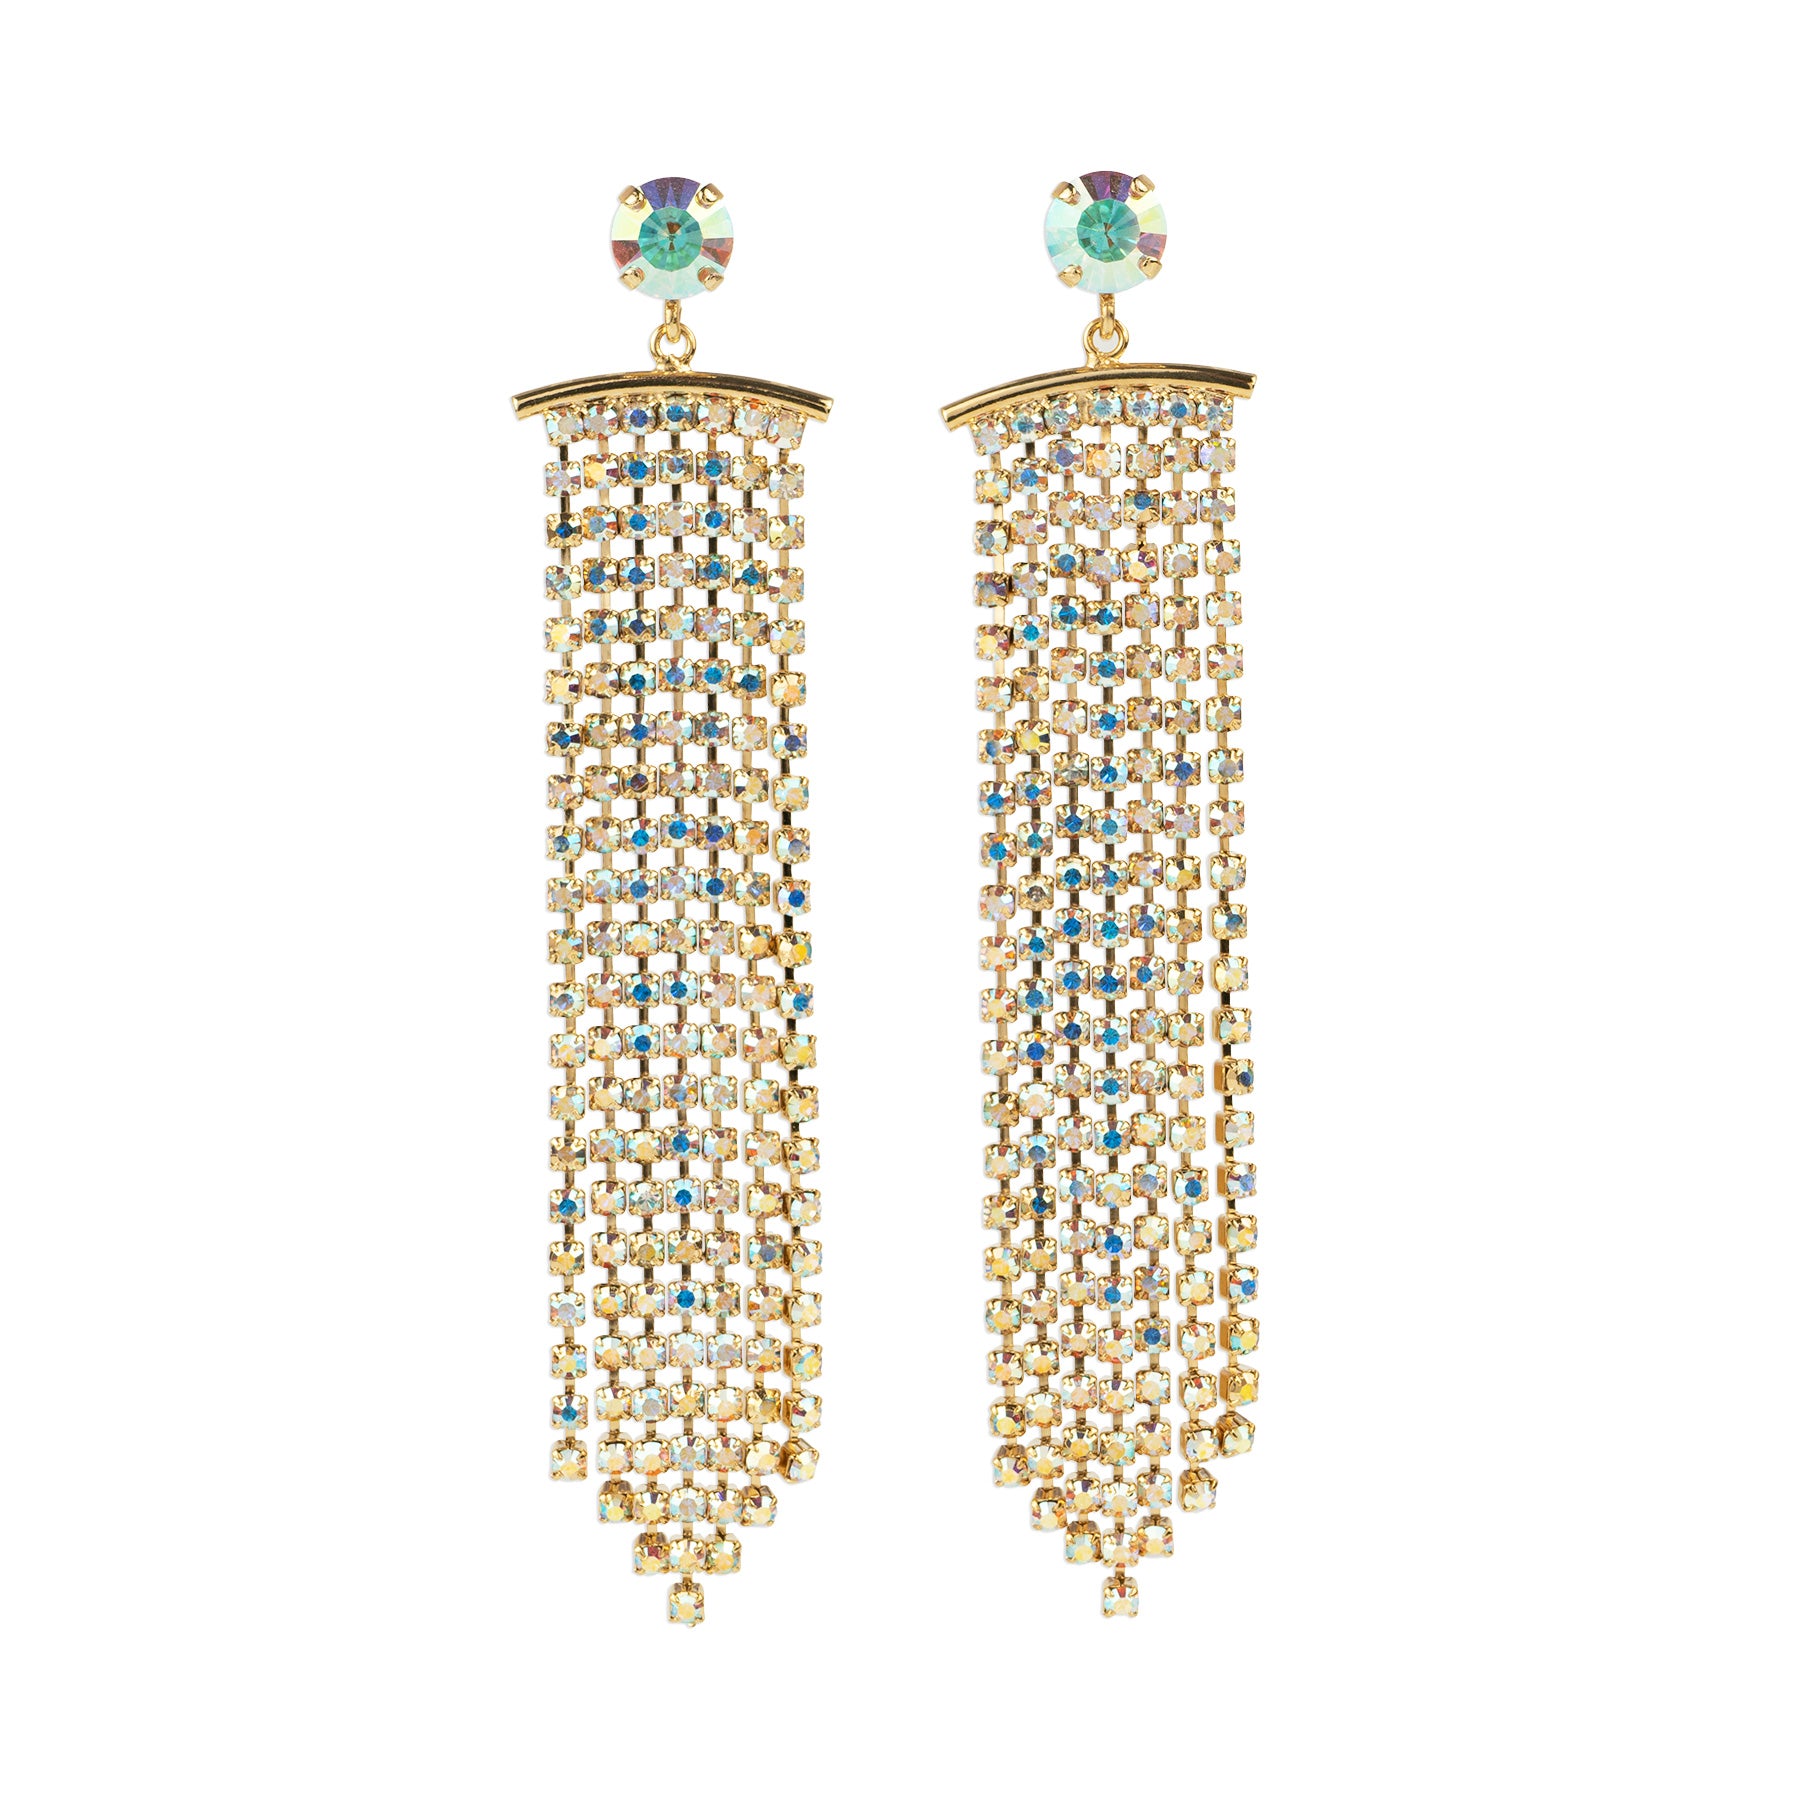 Drop earrings with crystal fringe